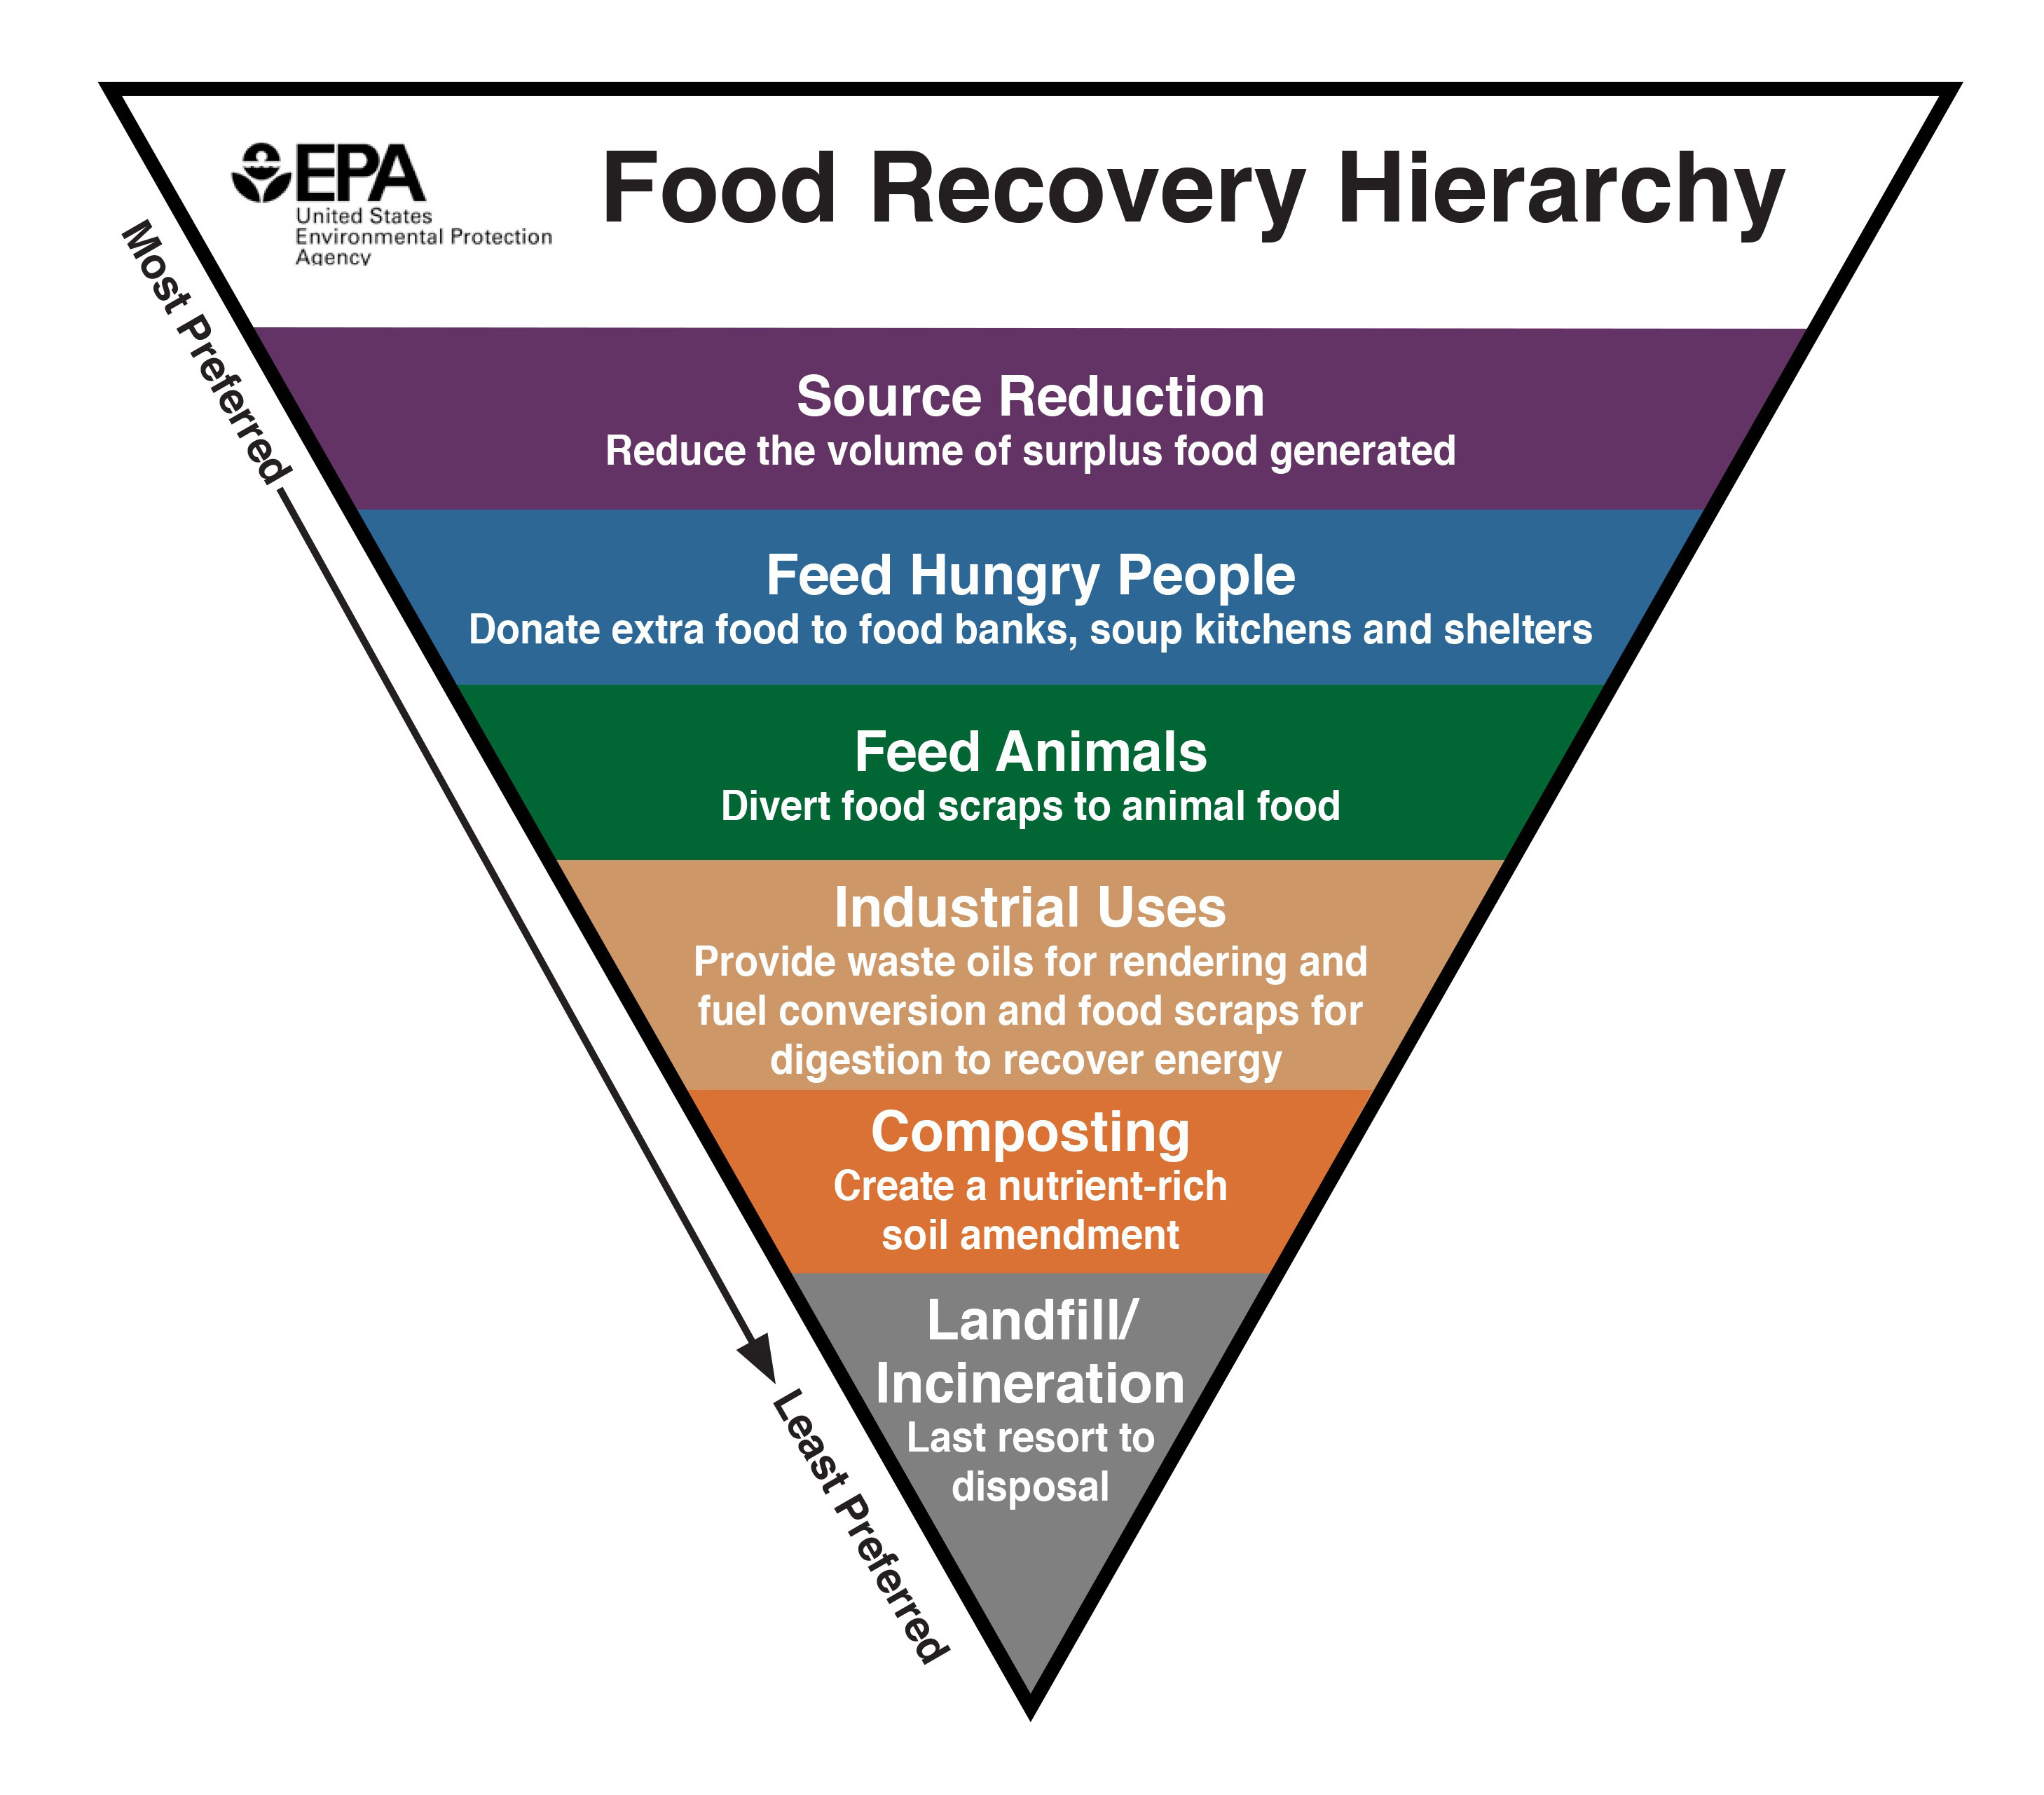 The US EPA's Food Recovery Hierarchy